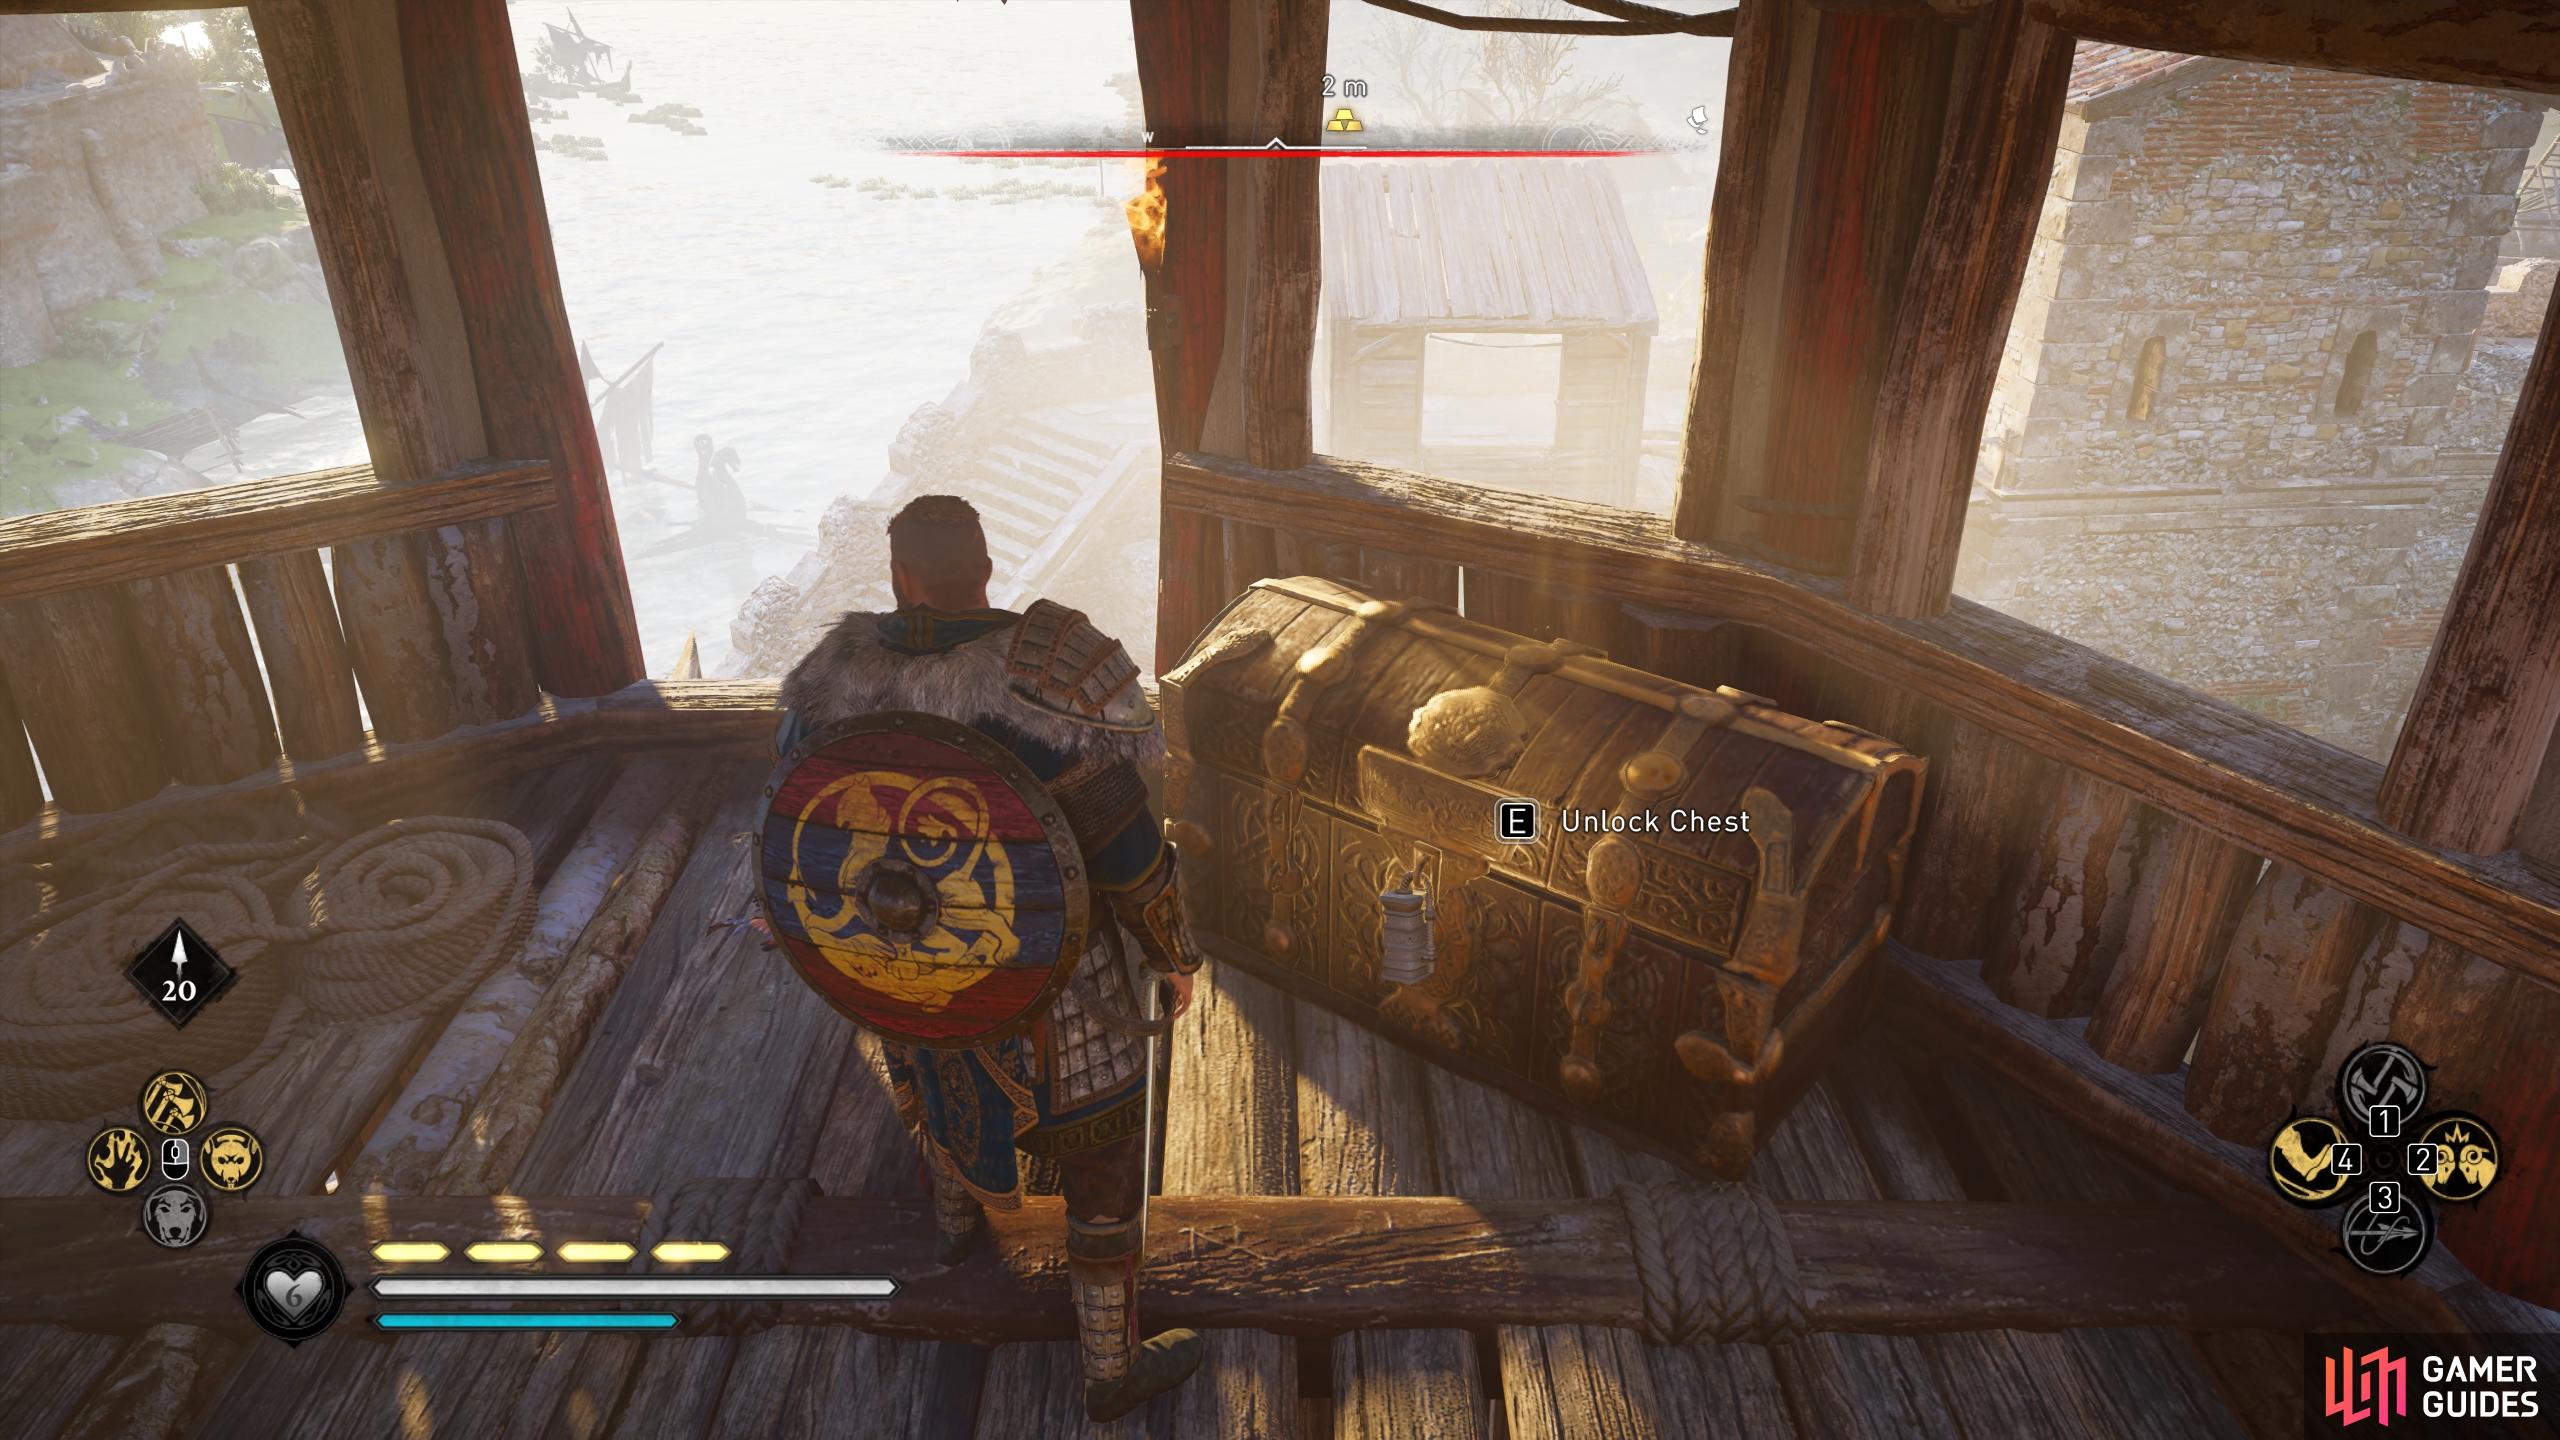 You can use the key from the Standard-Bearer to open the chest at the top of the tower.